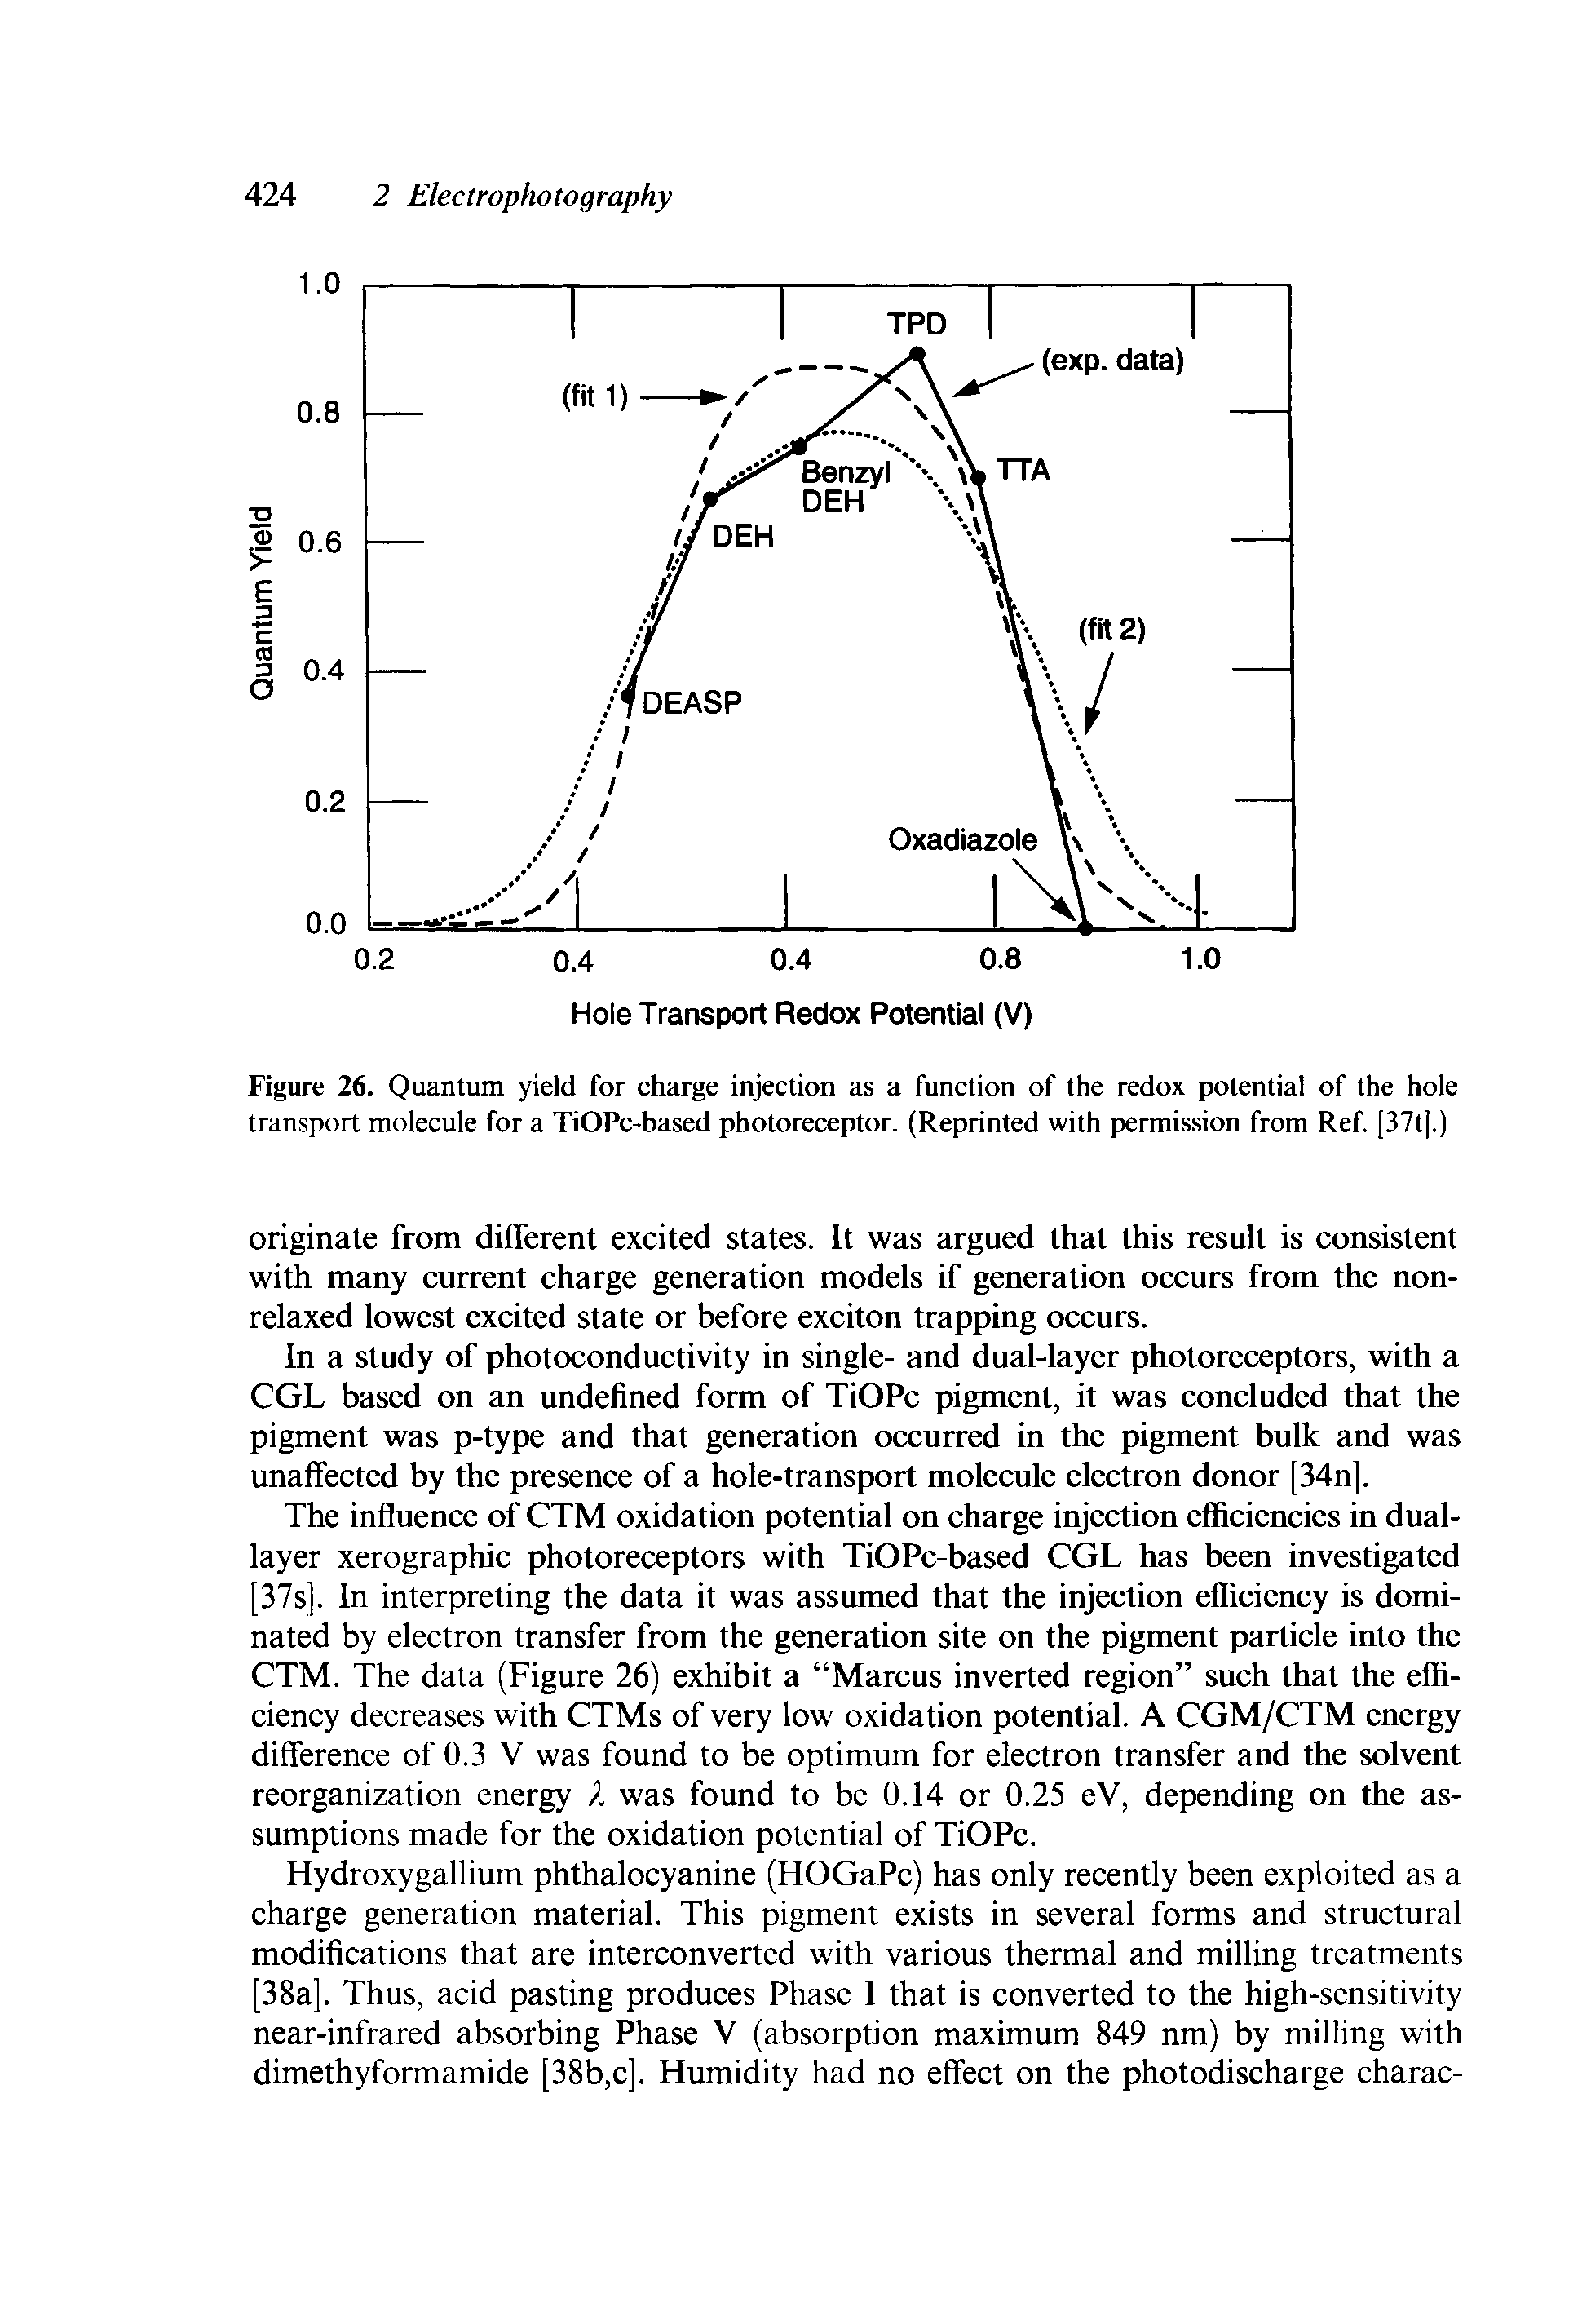 Figure 26. Quantum yield for charge injection as a function of the redox potential of the hole transport molecule for a TiOPc-based photoreceptor. (Reprinted with permission from Ref [37t].)...